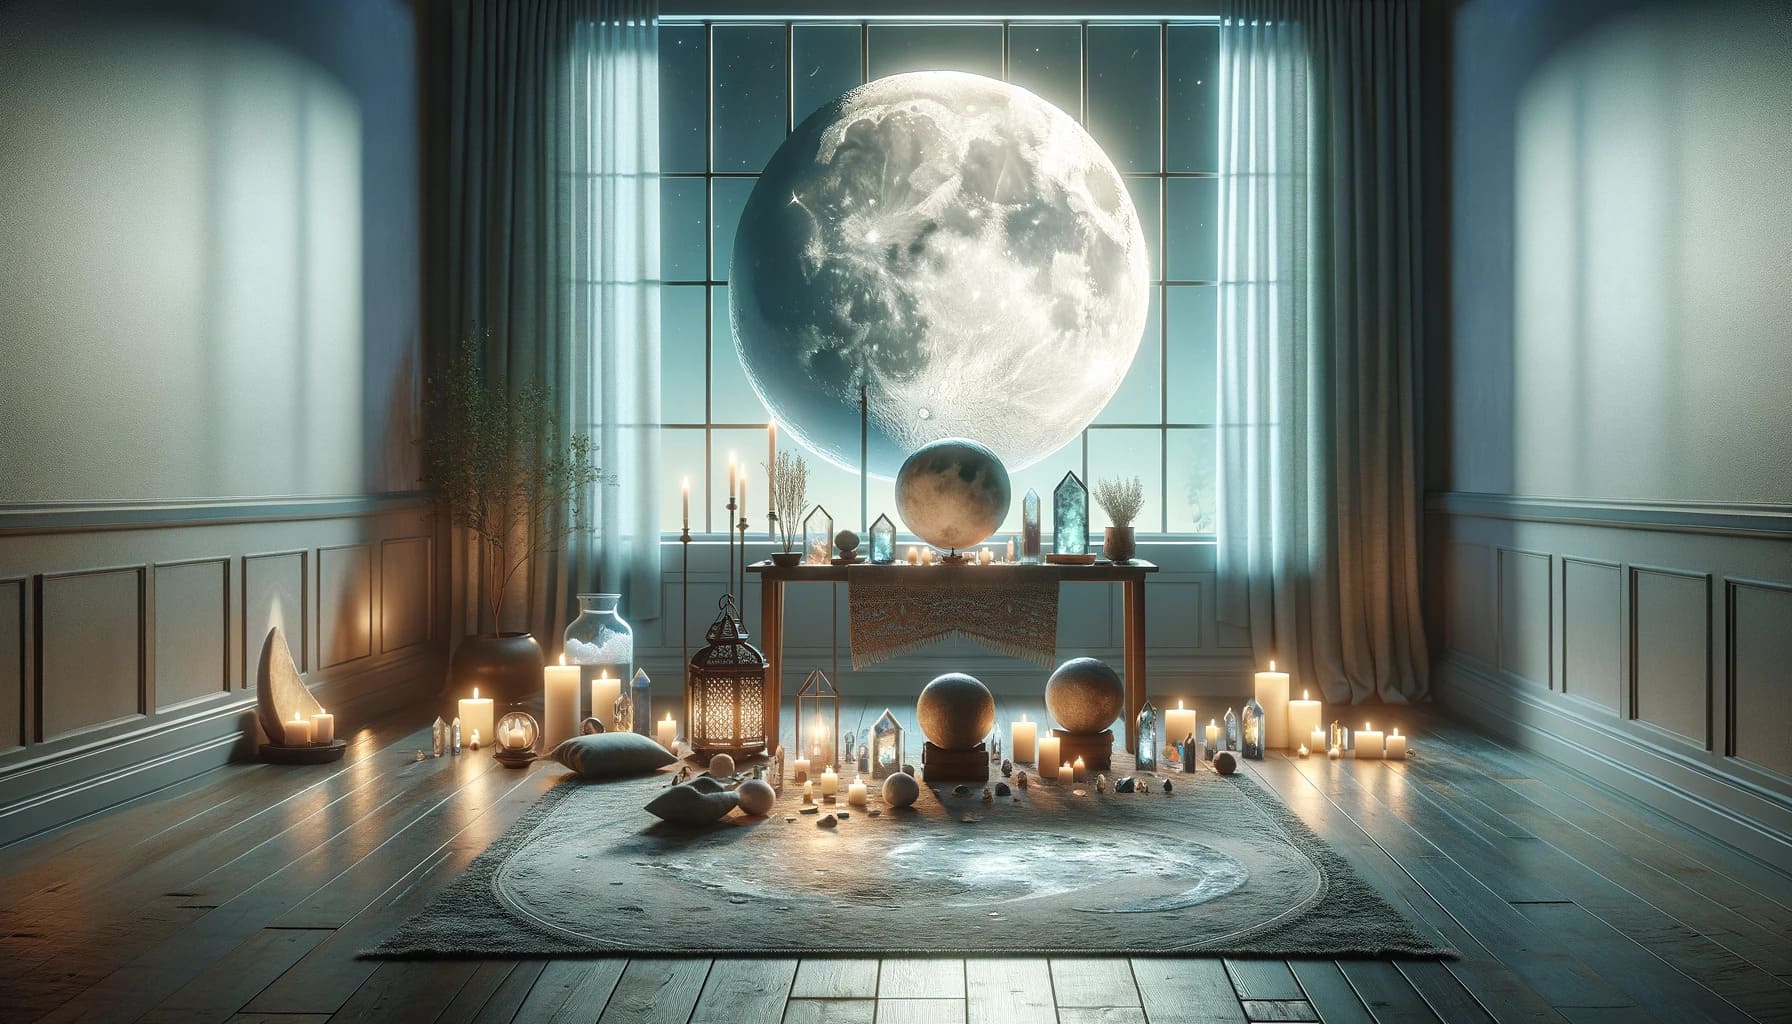 symbols of lunar reflection importance such as moon phases crystals and candles. The alta